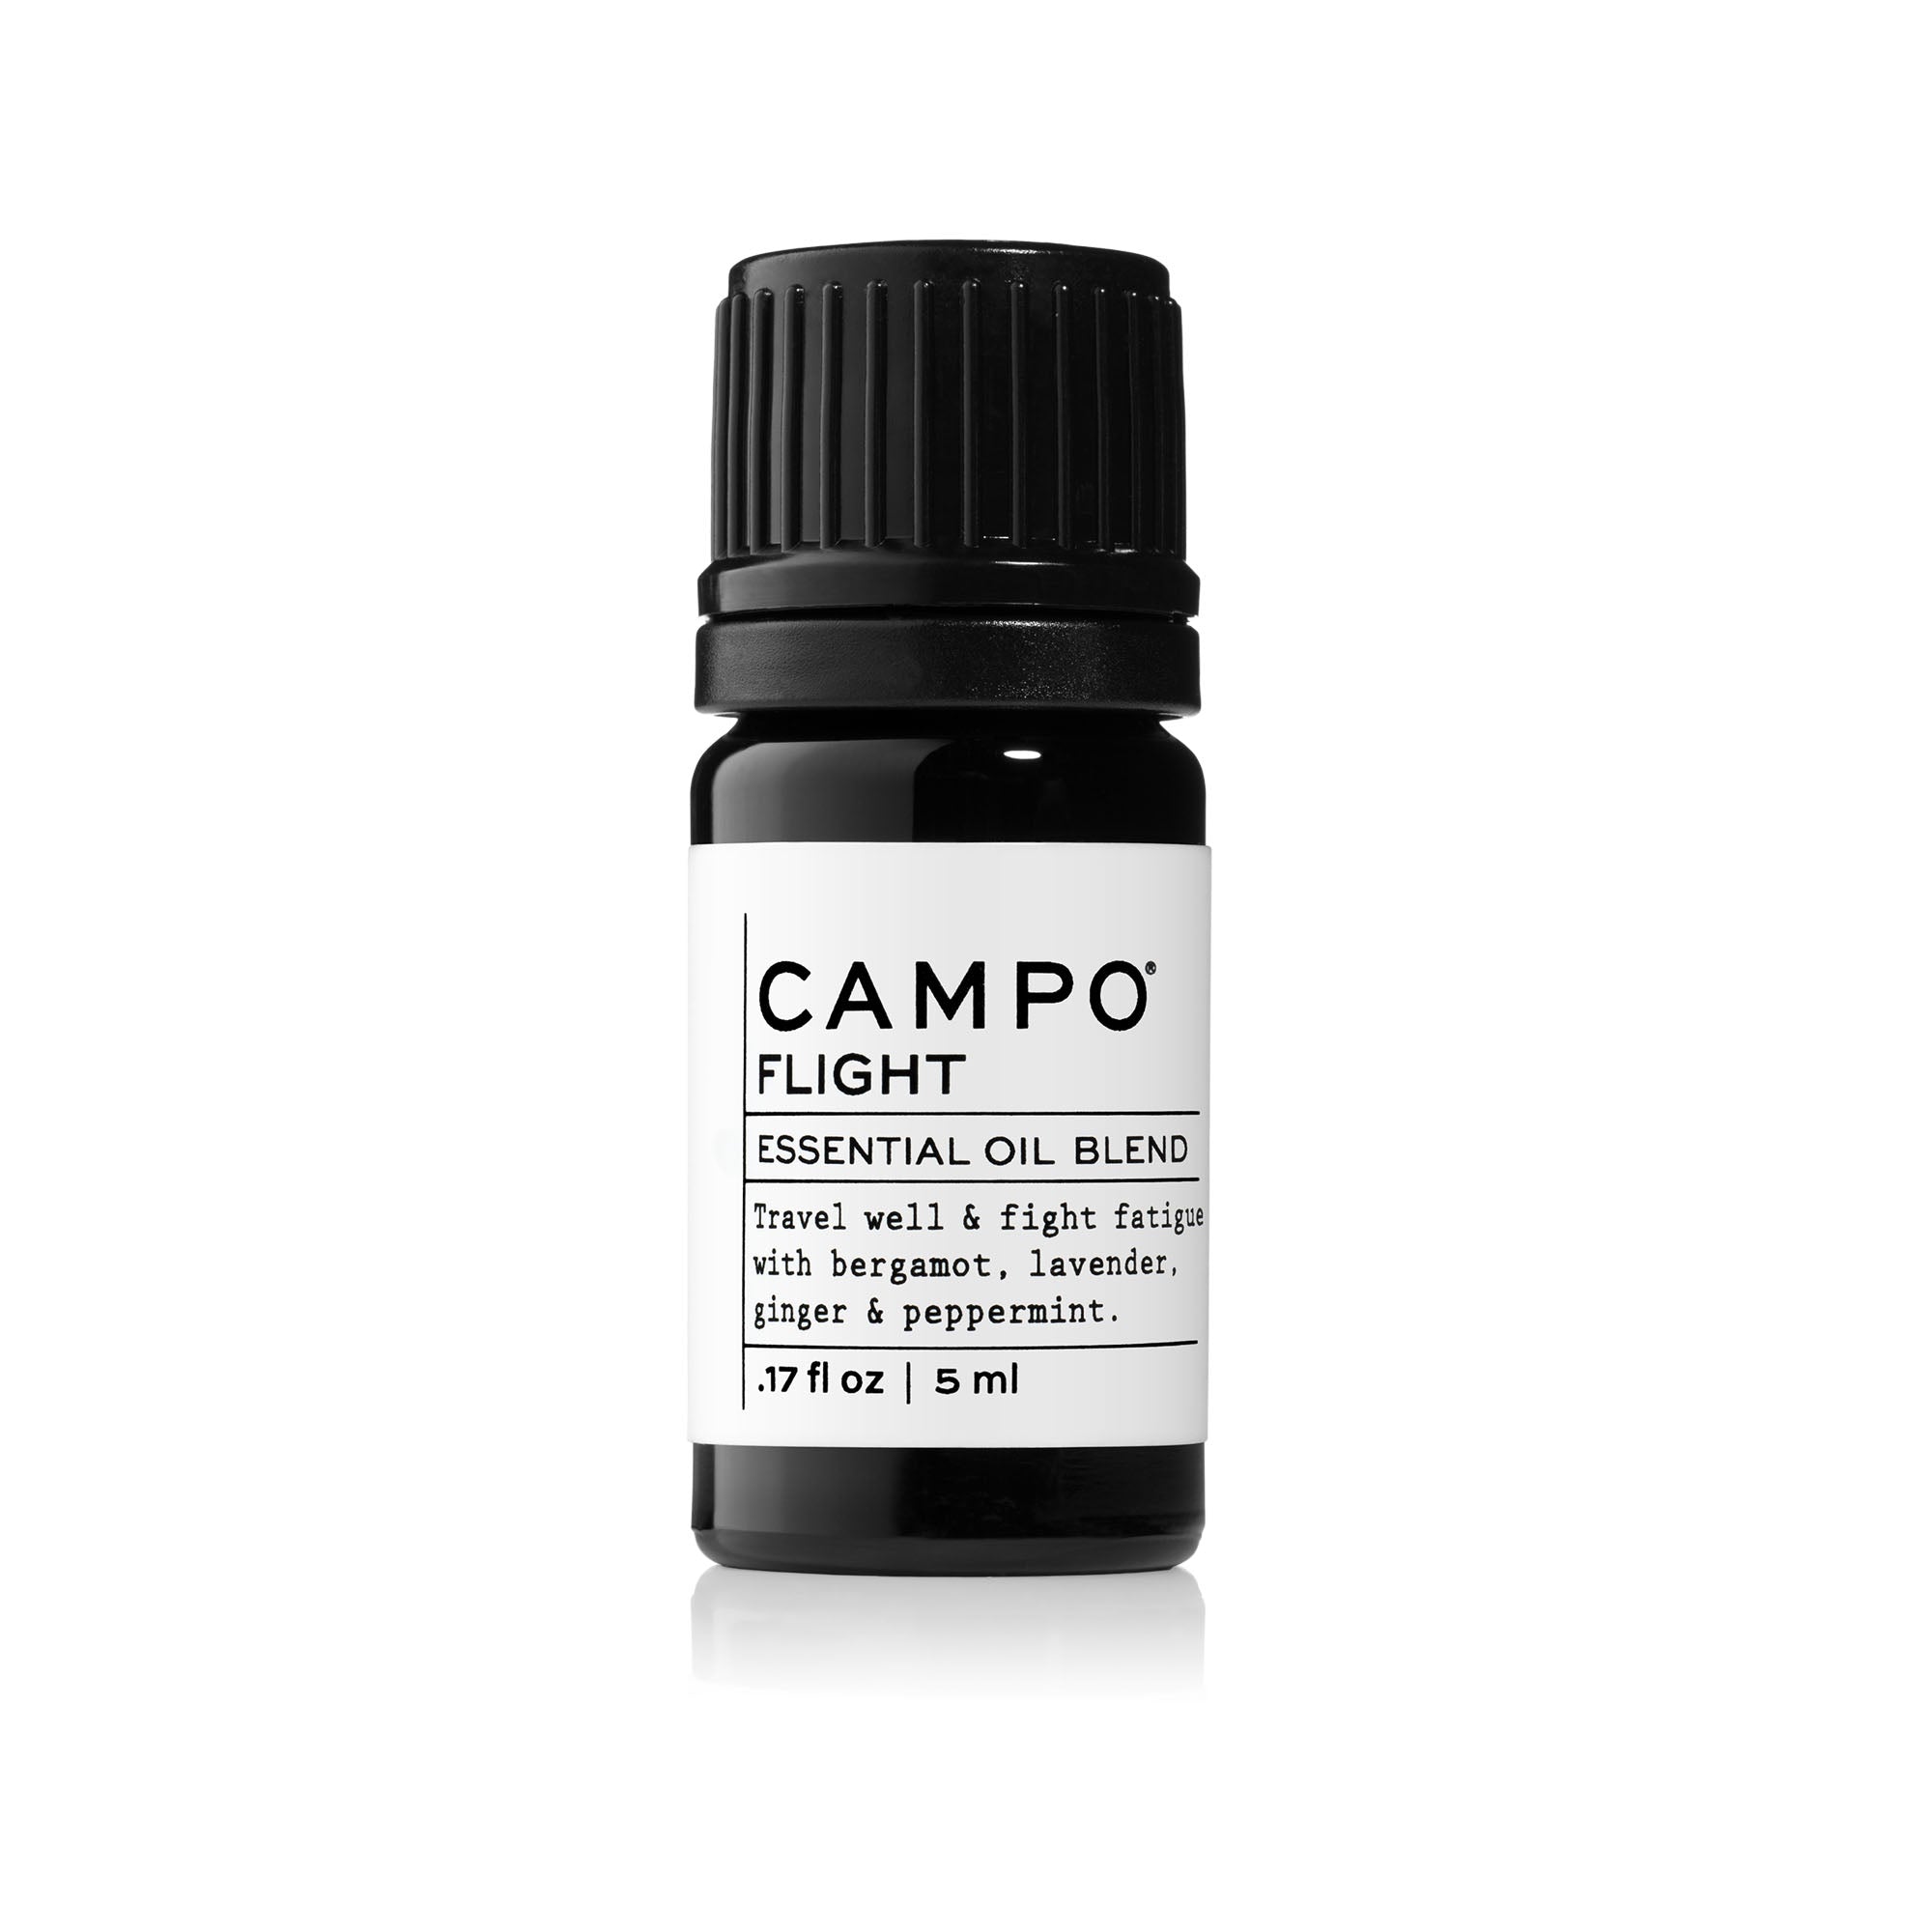 Campo Beauty FLIGHT Blend 15 ml Essential Oil. Dispels feelings of stress during flight and restores a sense of vitality and alertness in any time zone. Feel grounded and connected to your mind and body with this 100% pure essential oil roll-on blend of Bergamot, Lavender, Peppermint & Ginger.